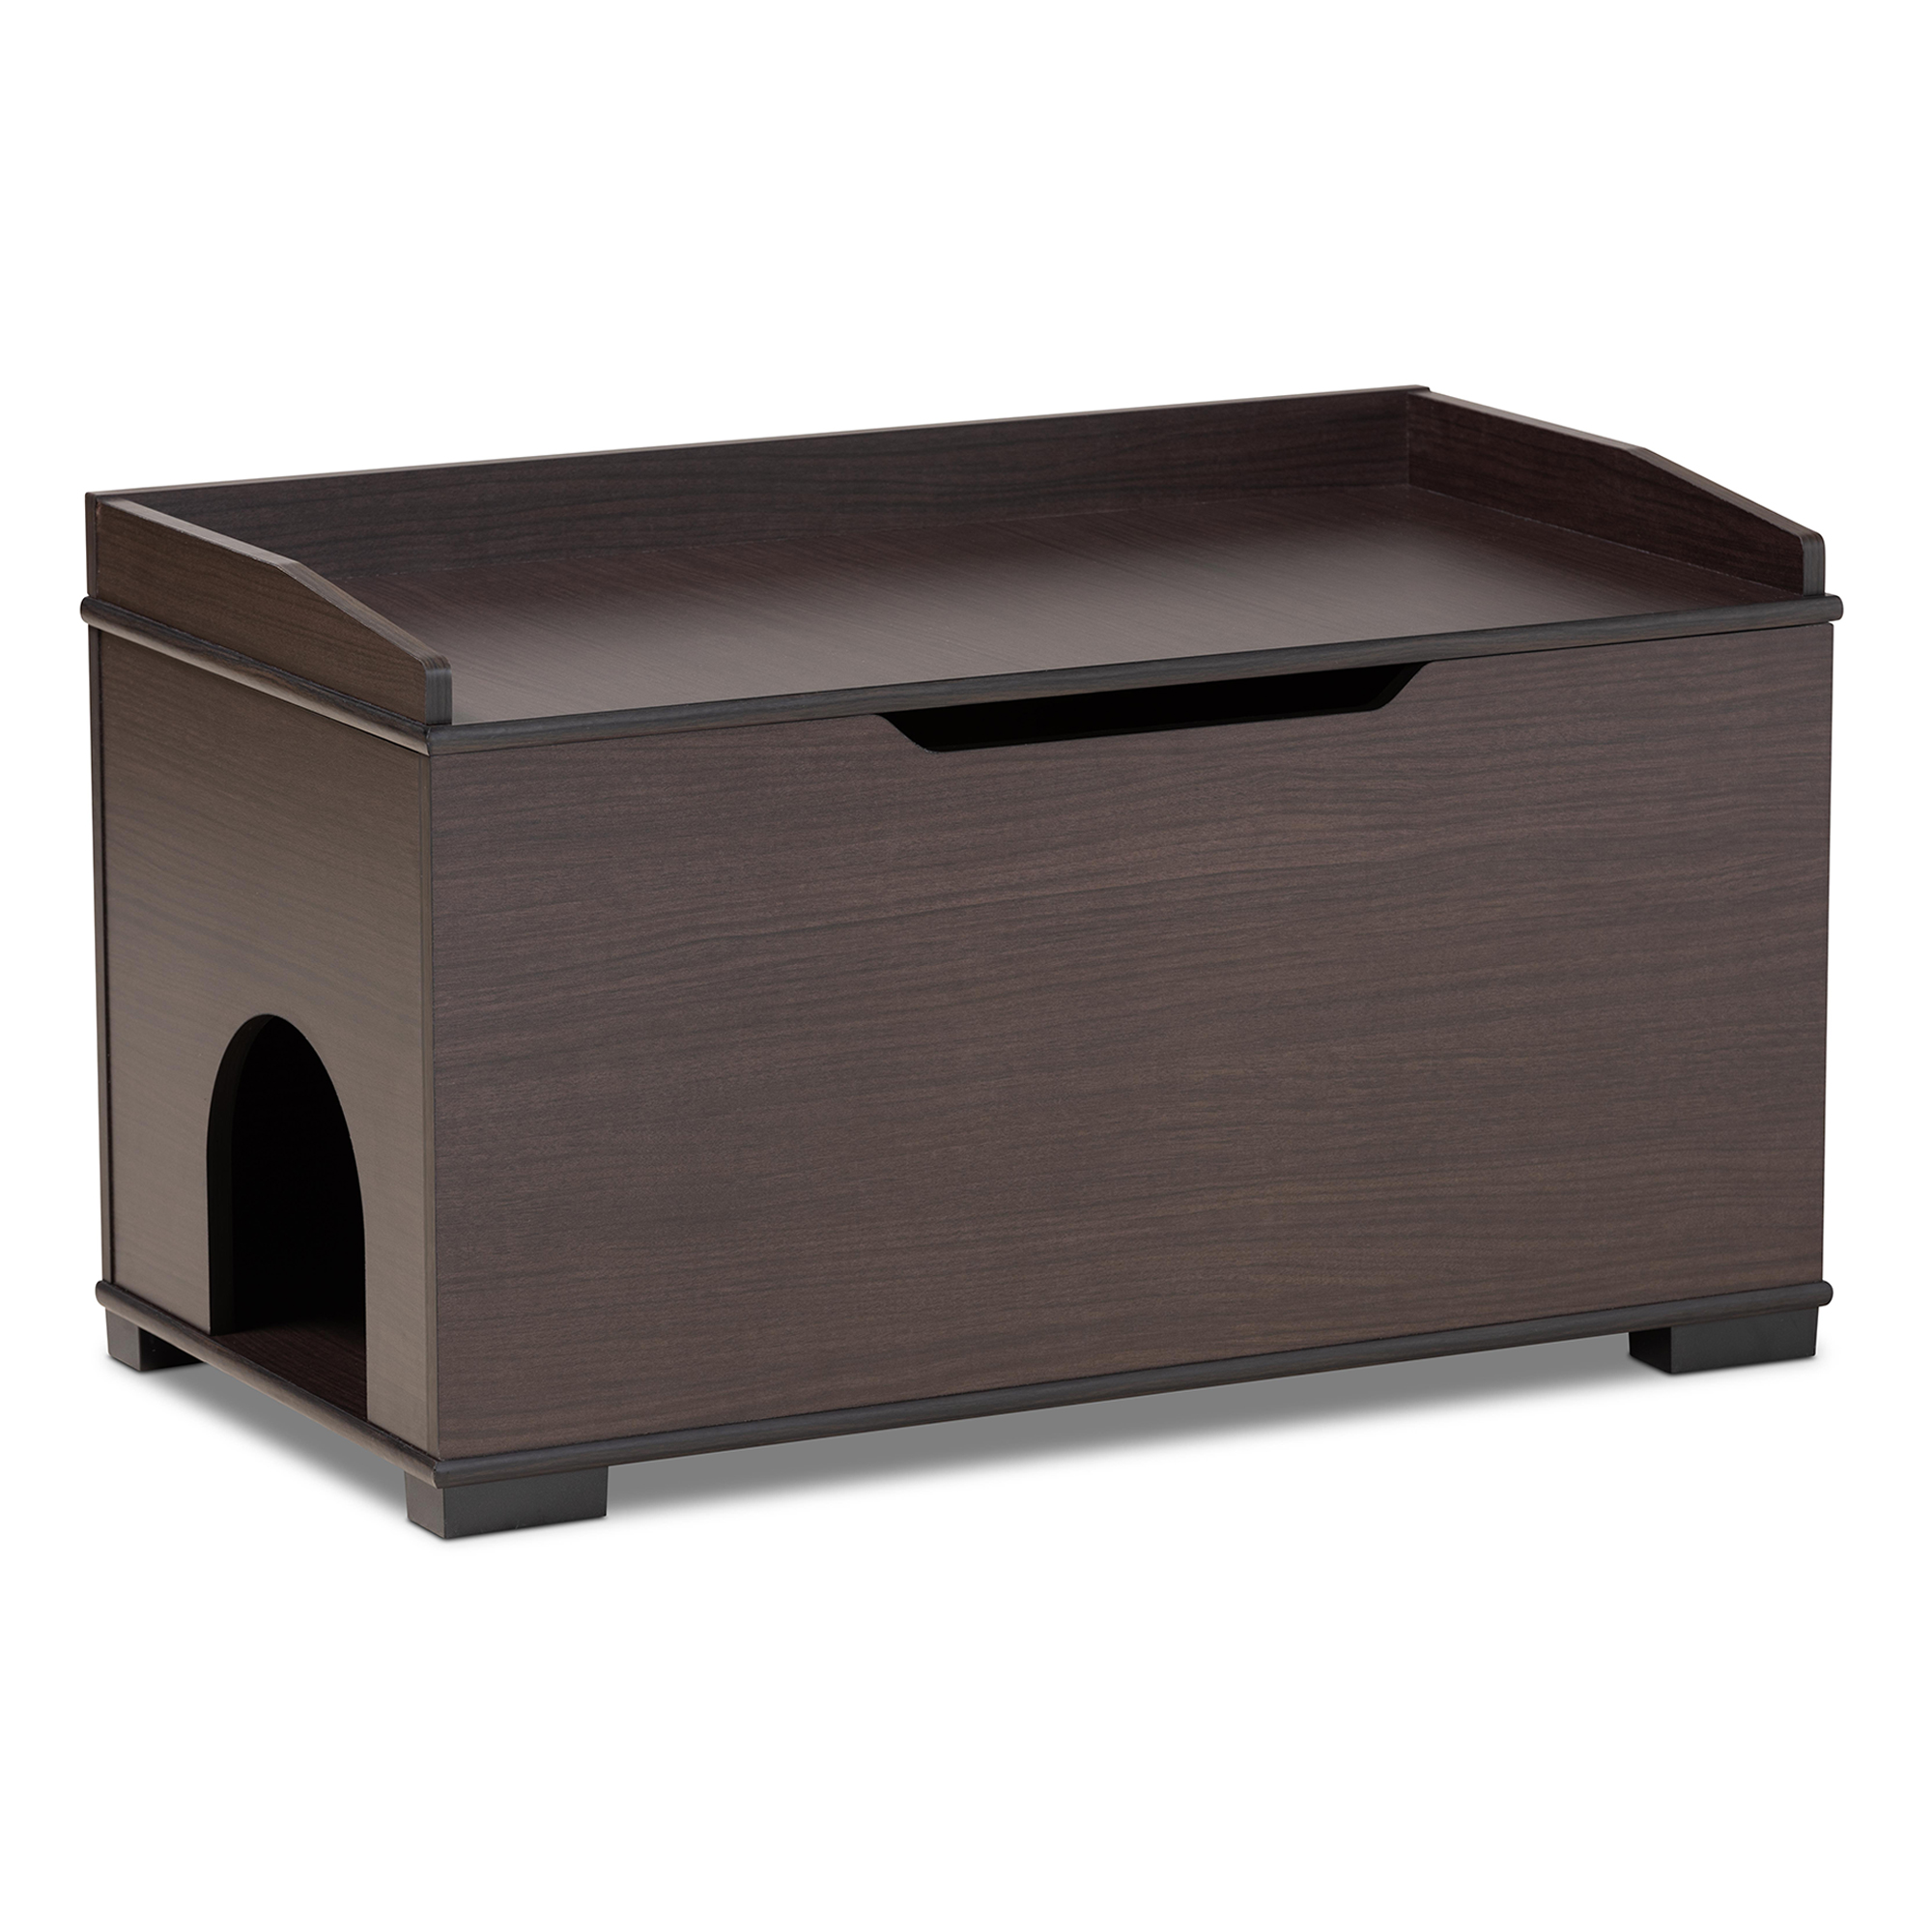 Baxton Studio Mariam Modern and Contemporary Dark Brown Finished Wood Cat Litter Box Cover House